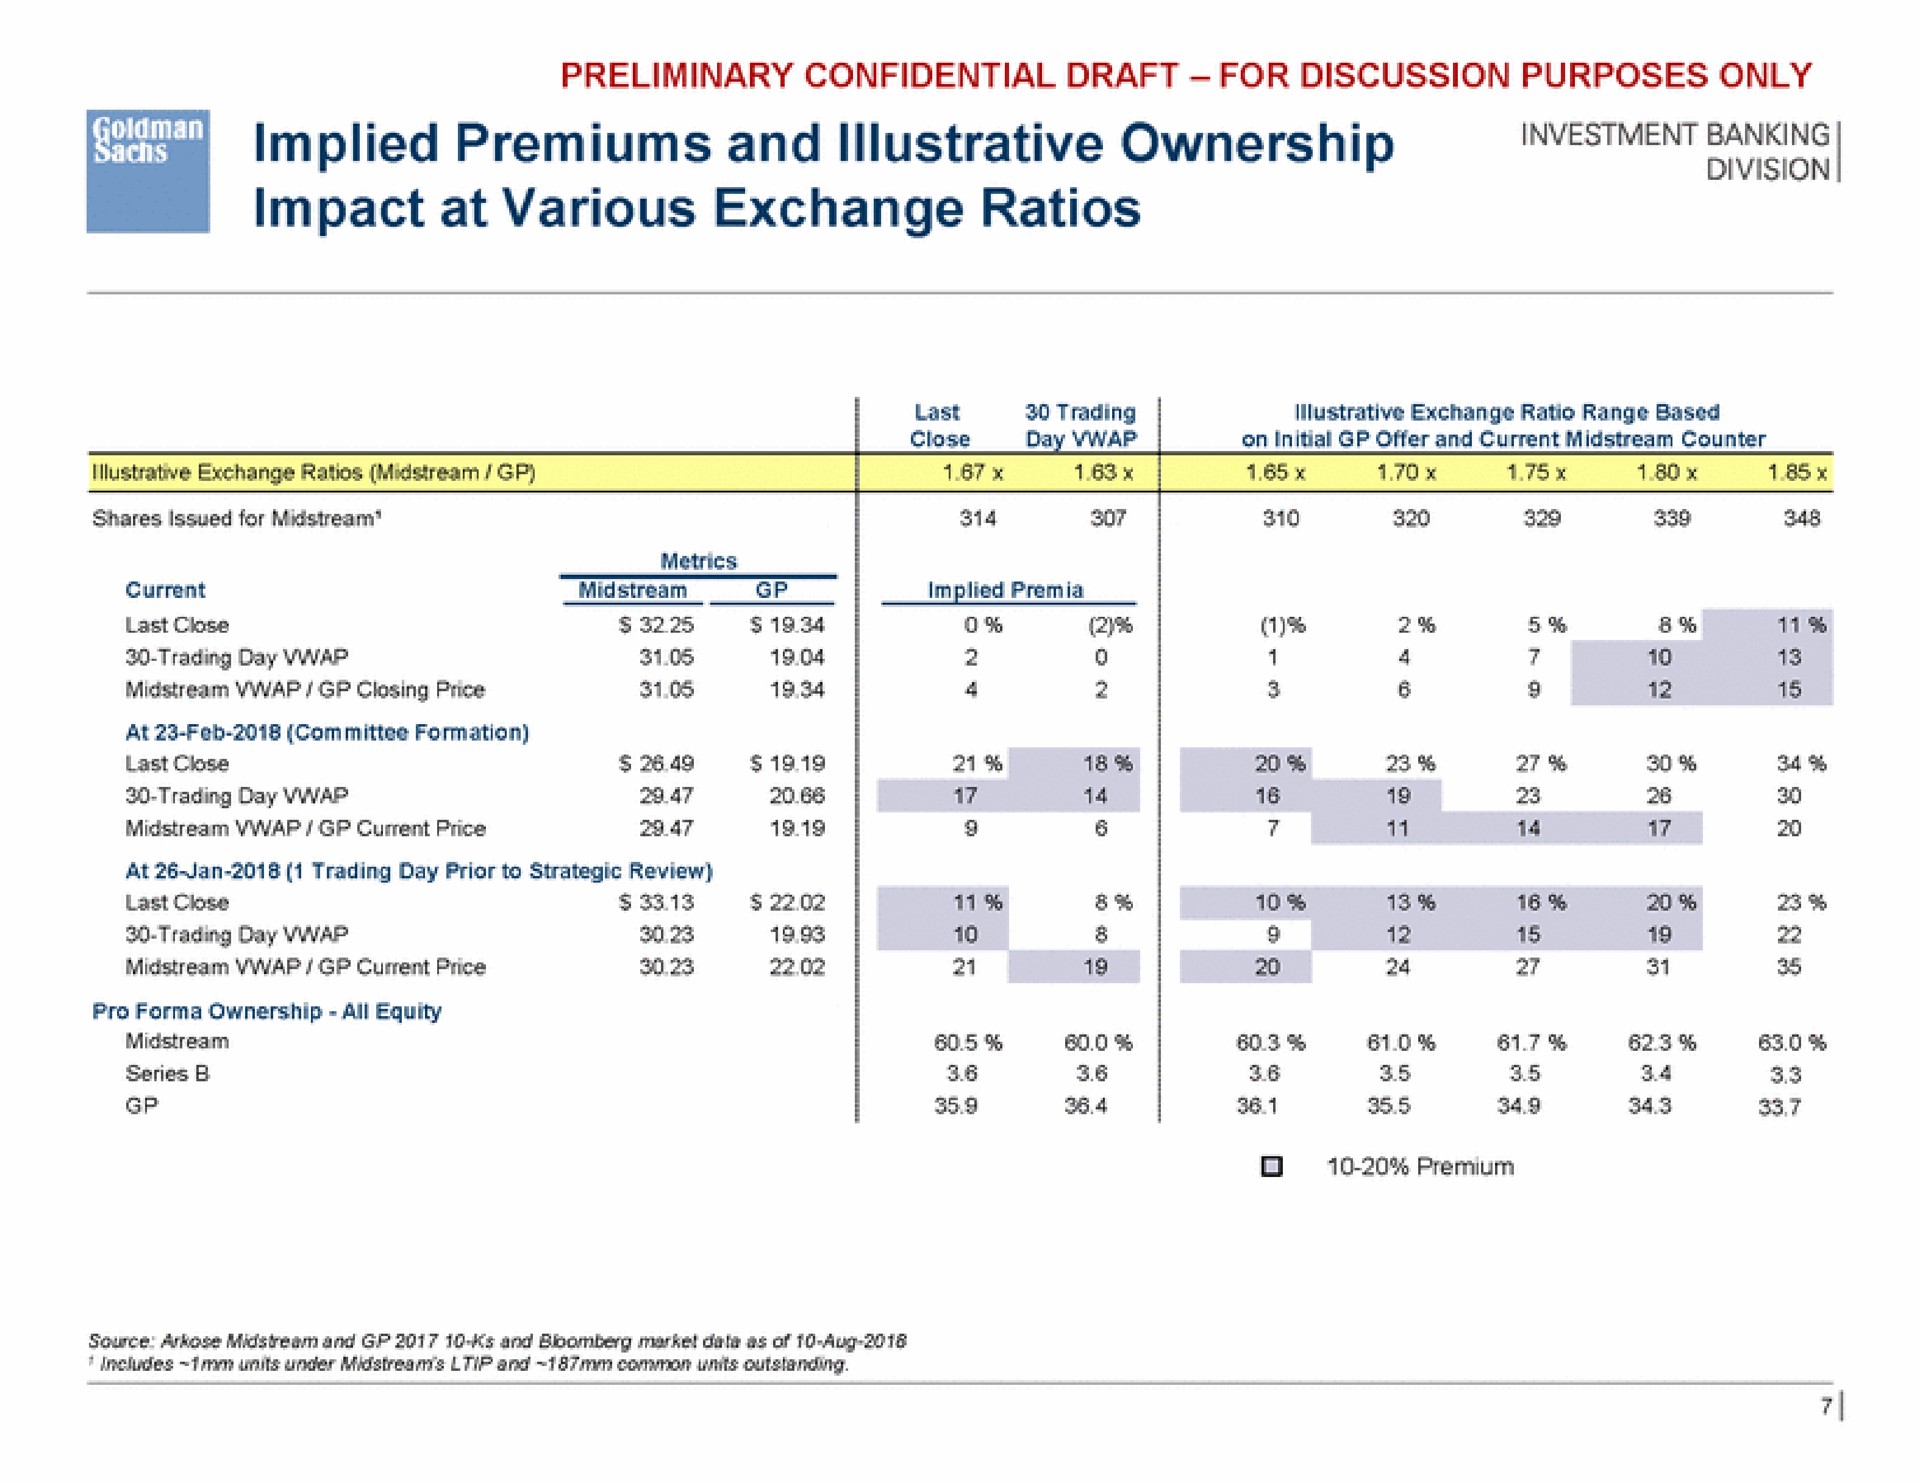 see implied premiums and illustrative ownership impact at various exchange ratios | Goldman Sachs